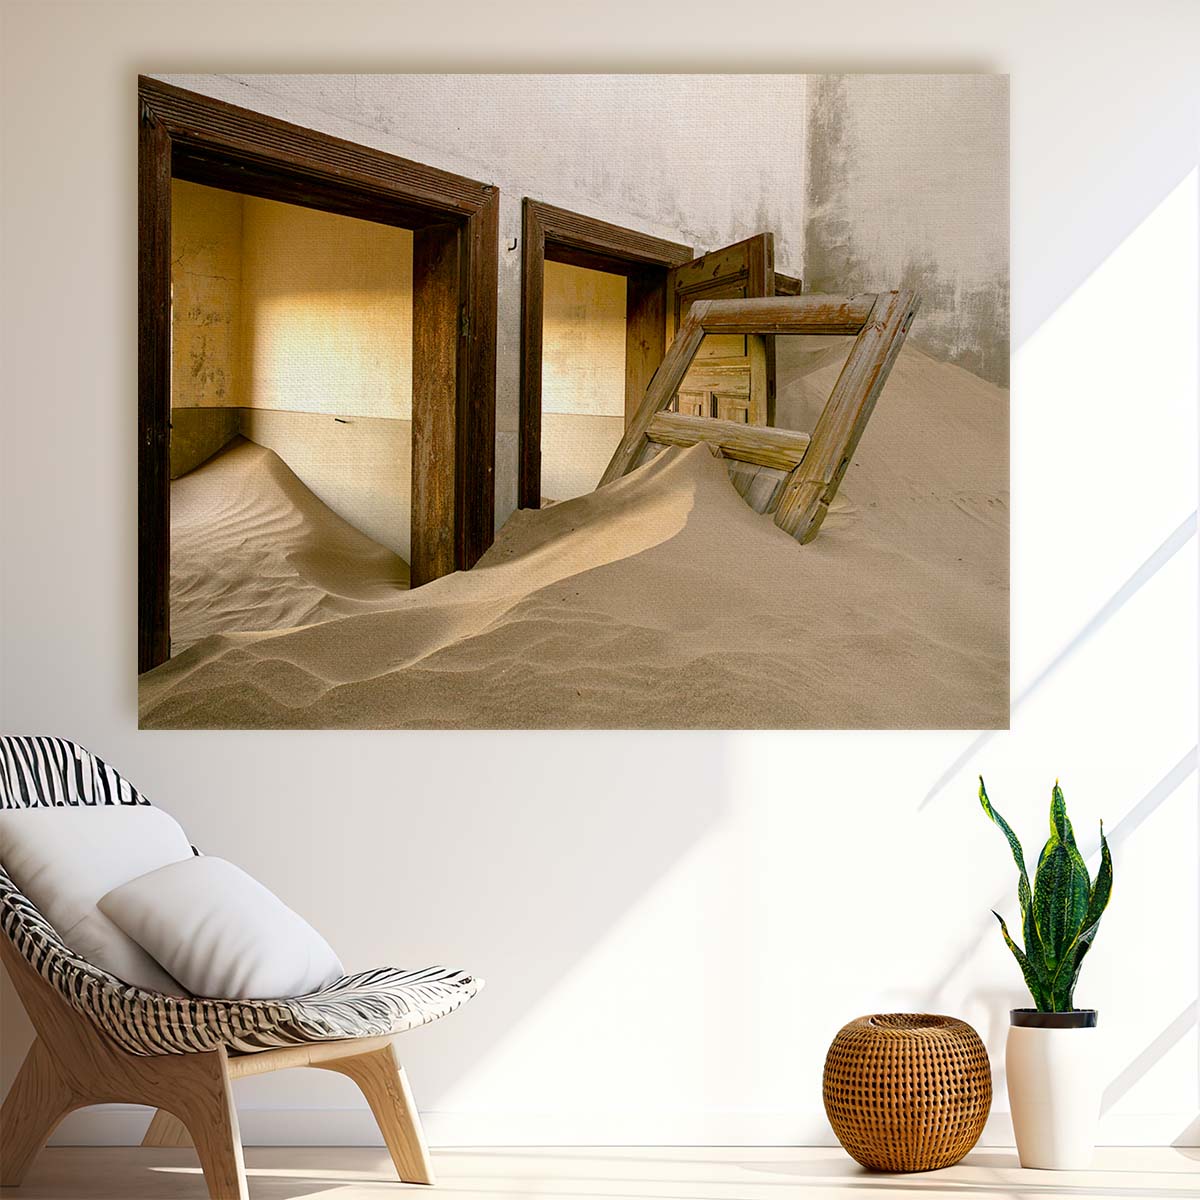 Abandoned Sand Dune House Urbex Wall Art by Luxuriance Designs. Made in USA.